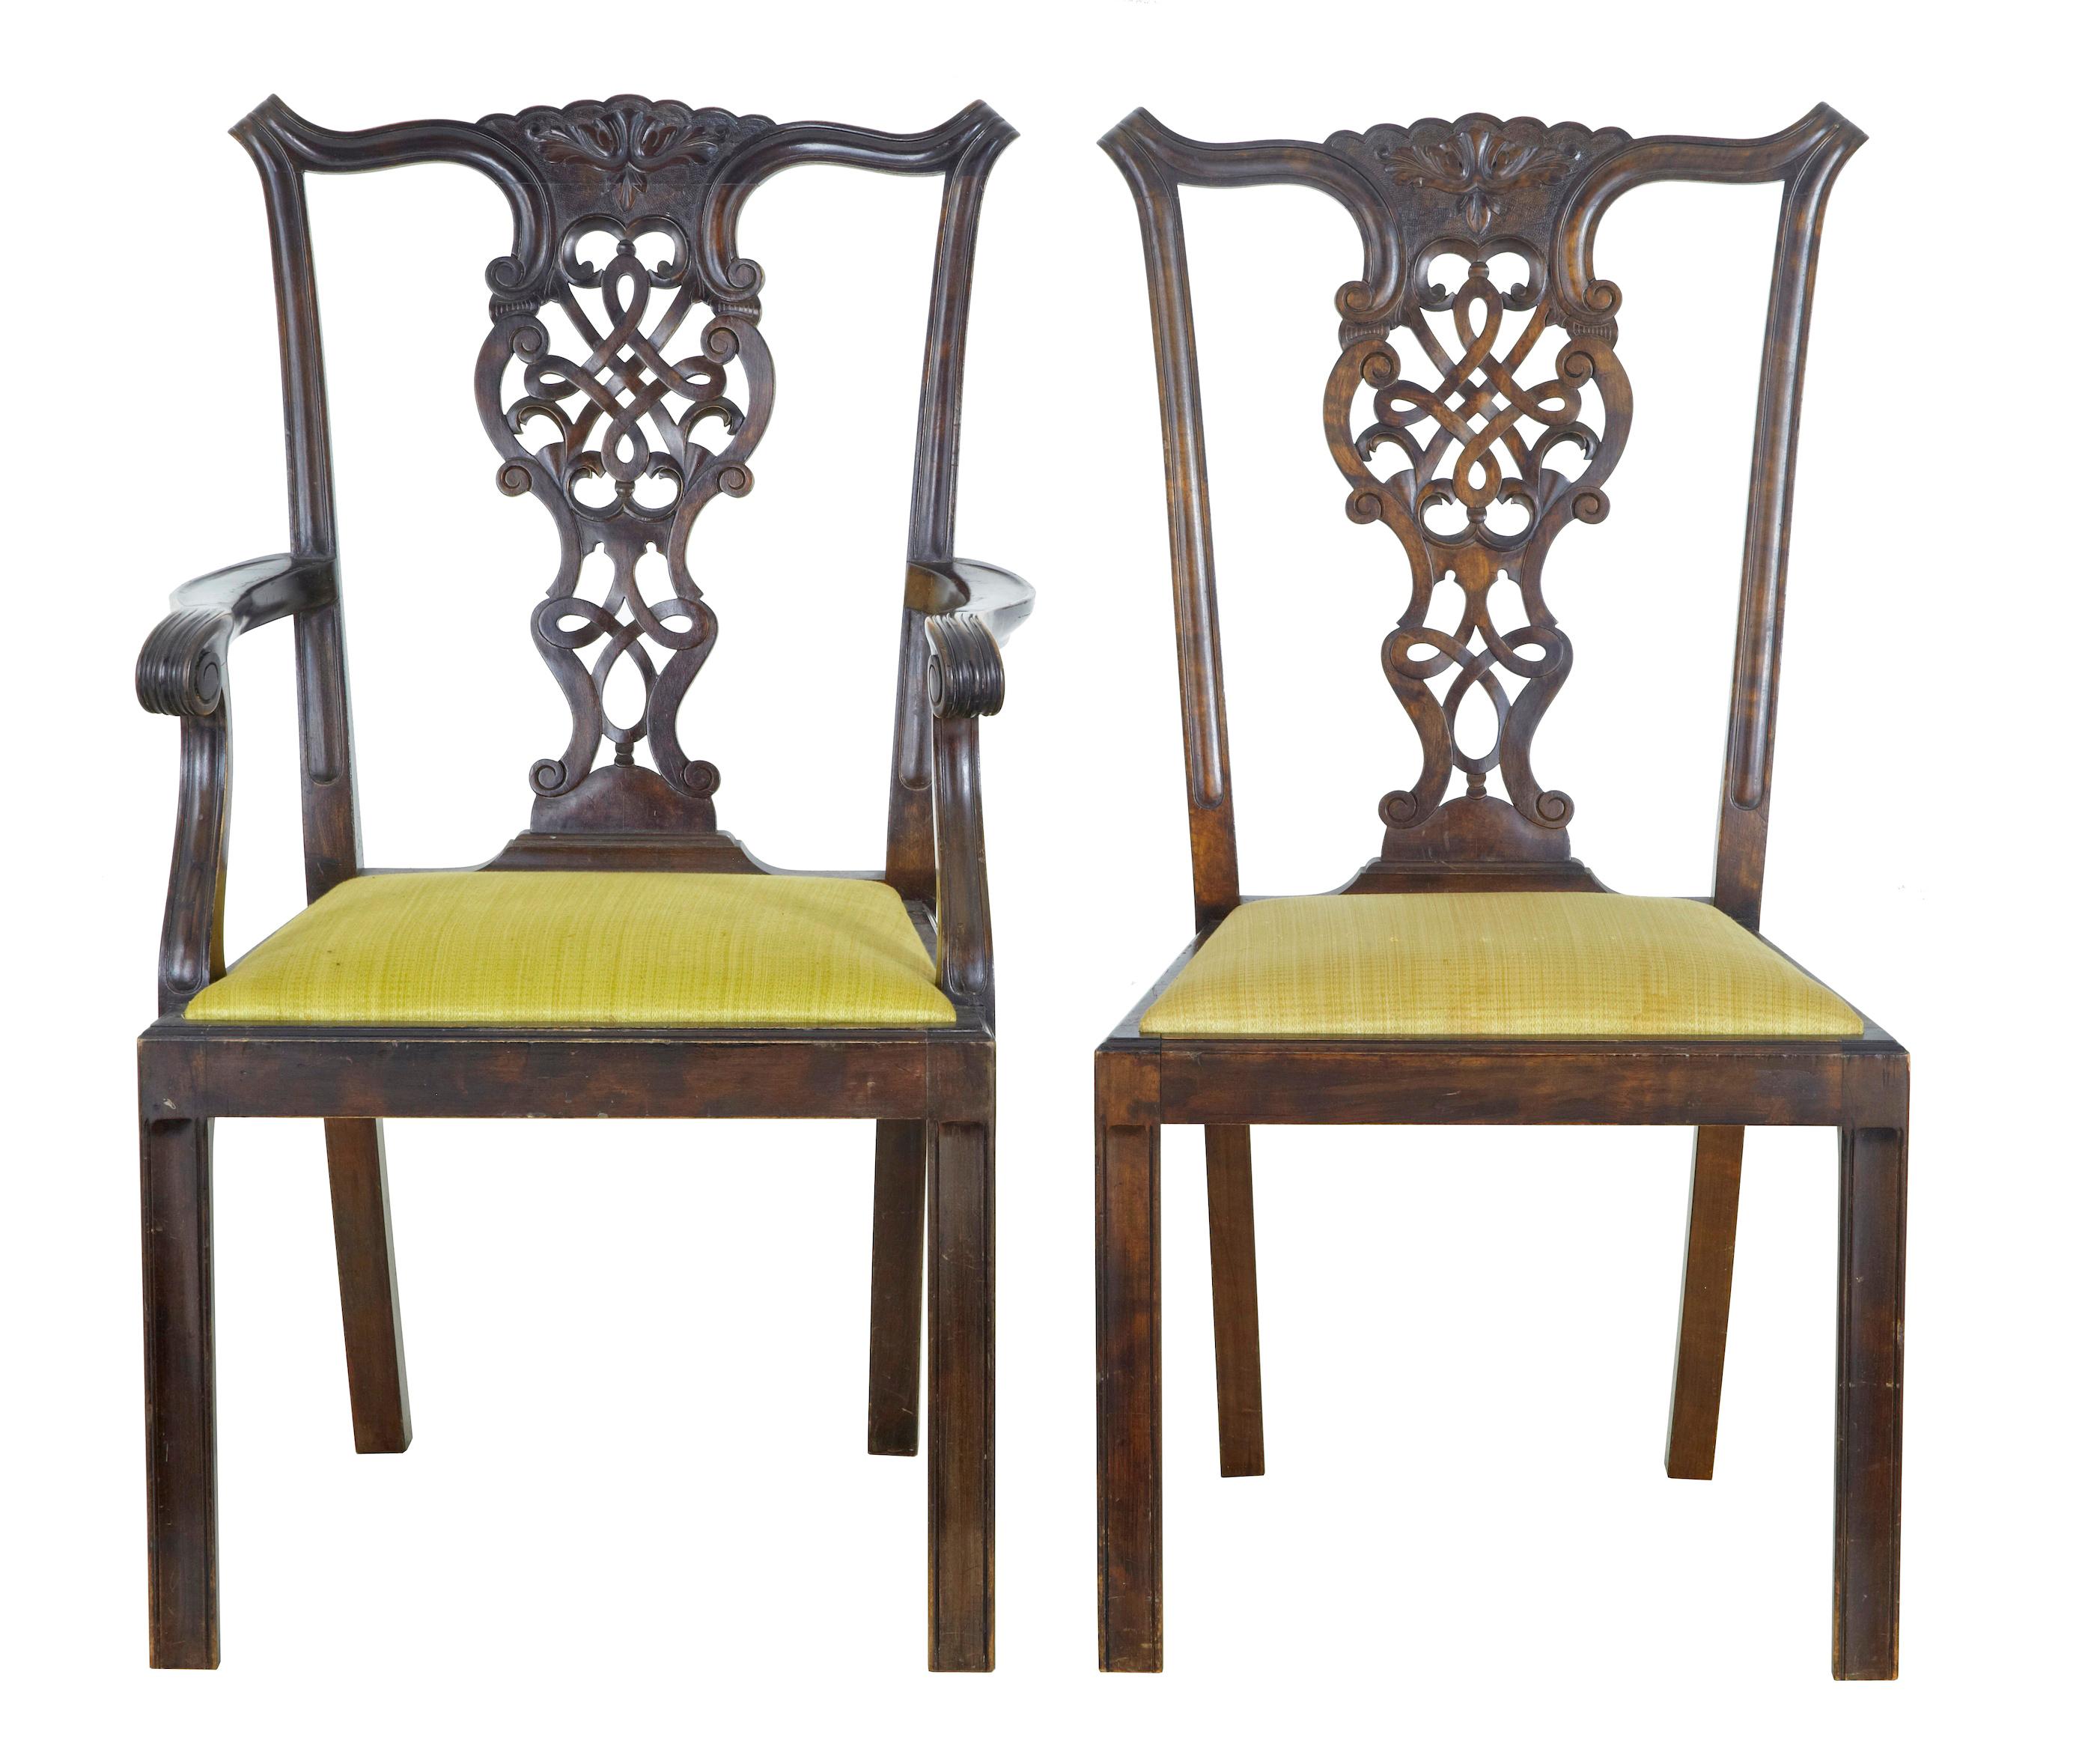 Set of 8+2 19th century carved birch chippendale design dining chairs circa 1890.

Comprising of 6 single and 2 armchairs. Pierced and carved back rests, carved and shaped scrolling arms. Stained dark birch in color. Structurally sound. Drop in